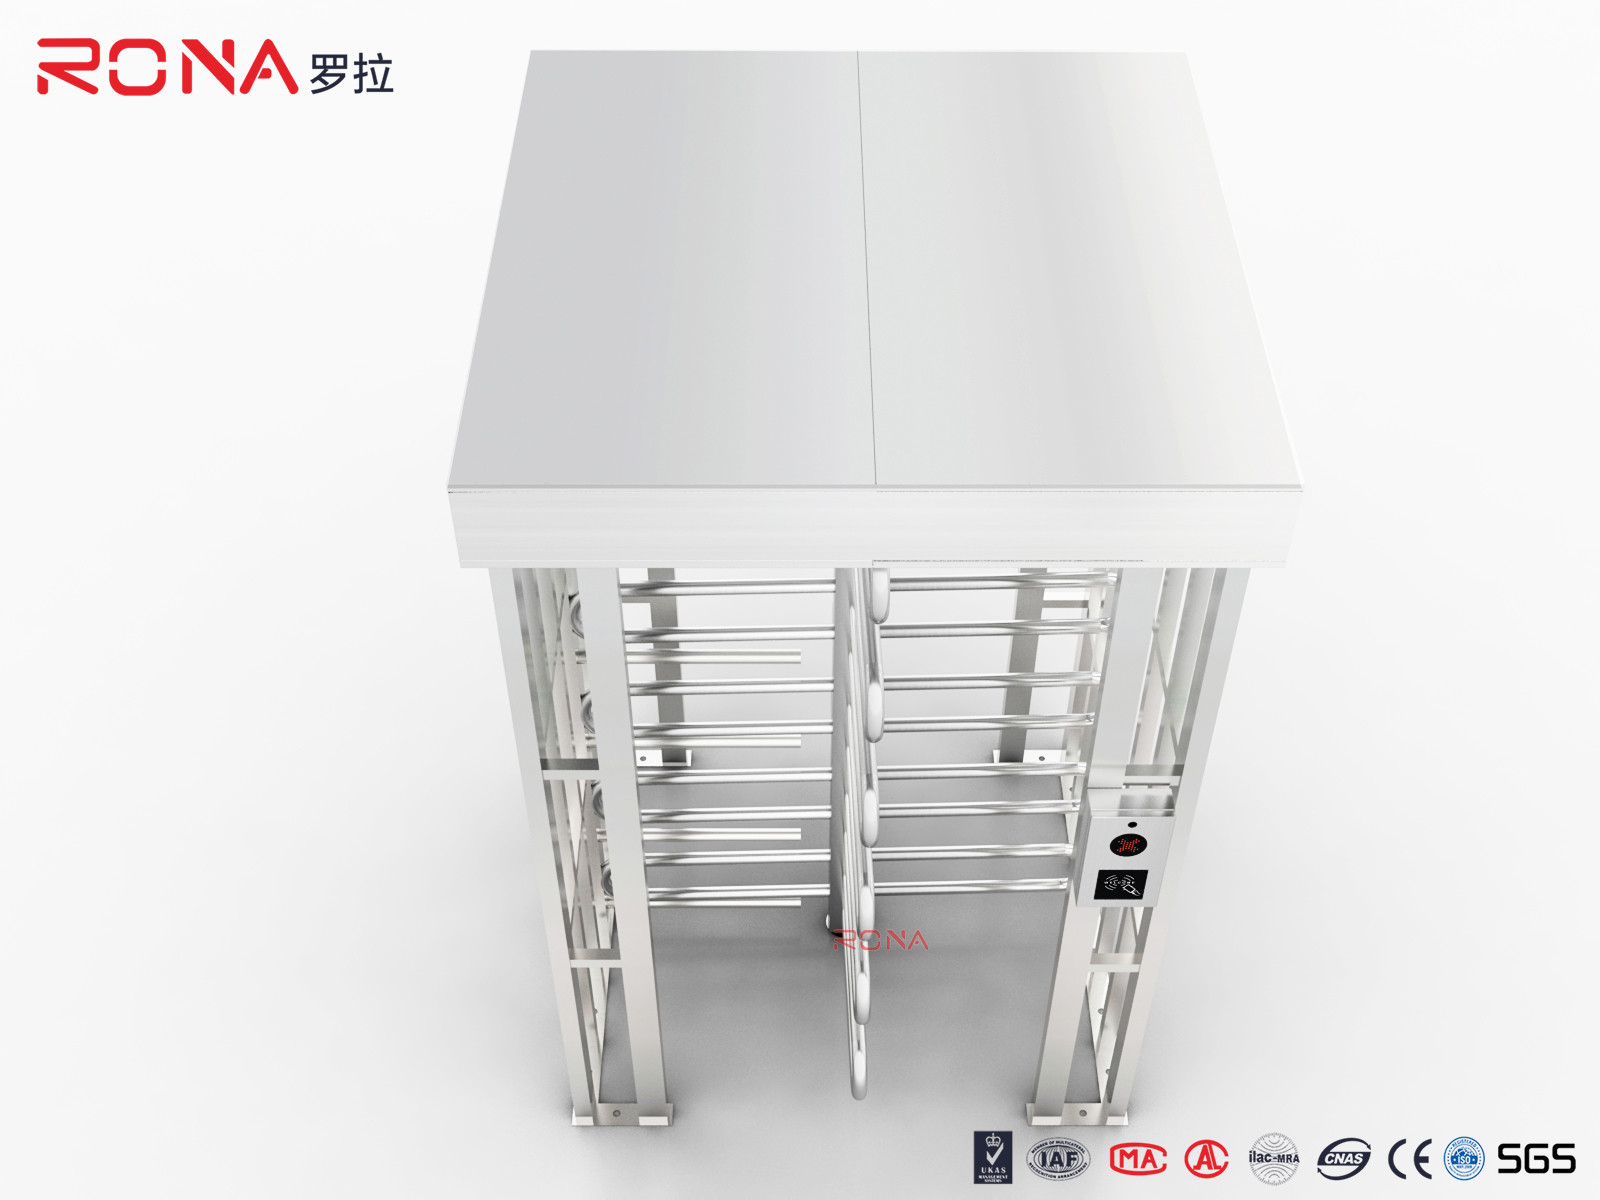  Pedestrian Access Control Full Height Turnstile For Military Bases Governmental Office Manufactures